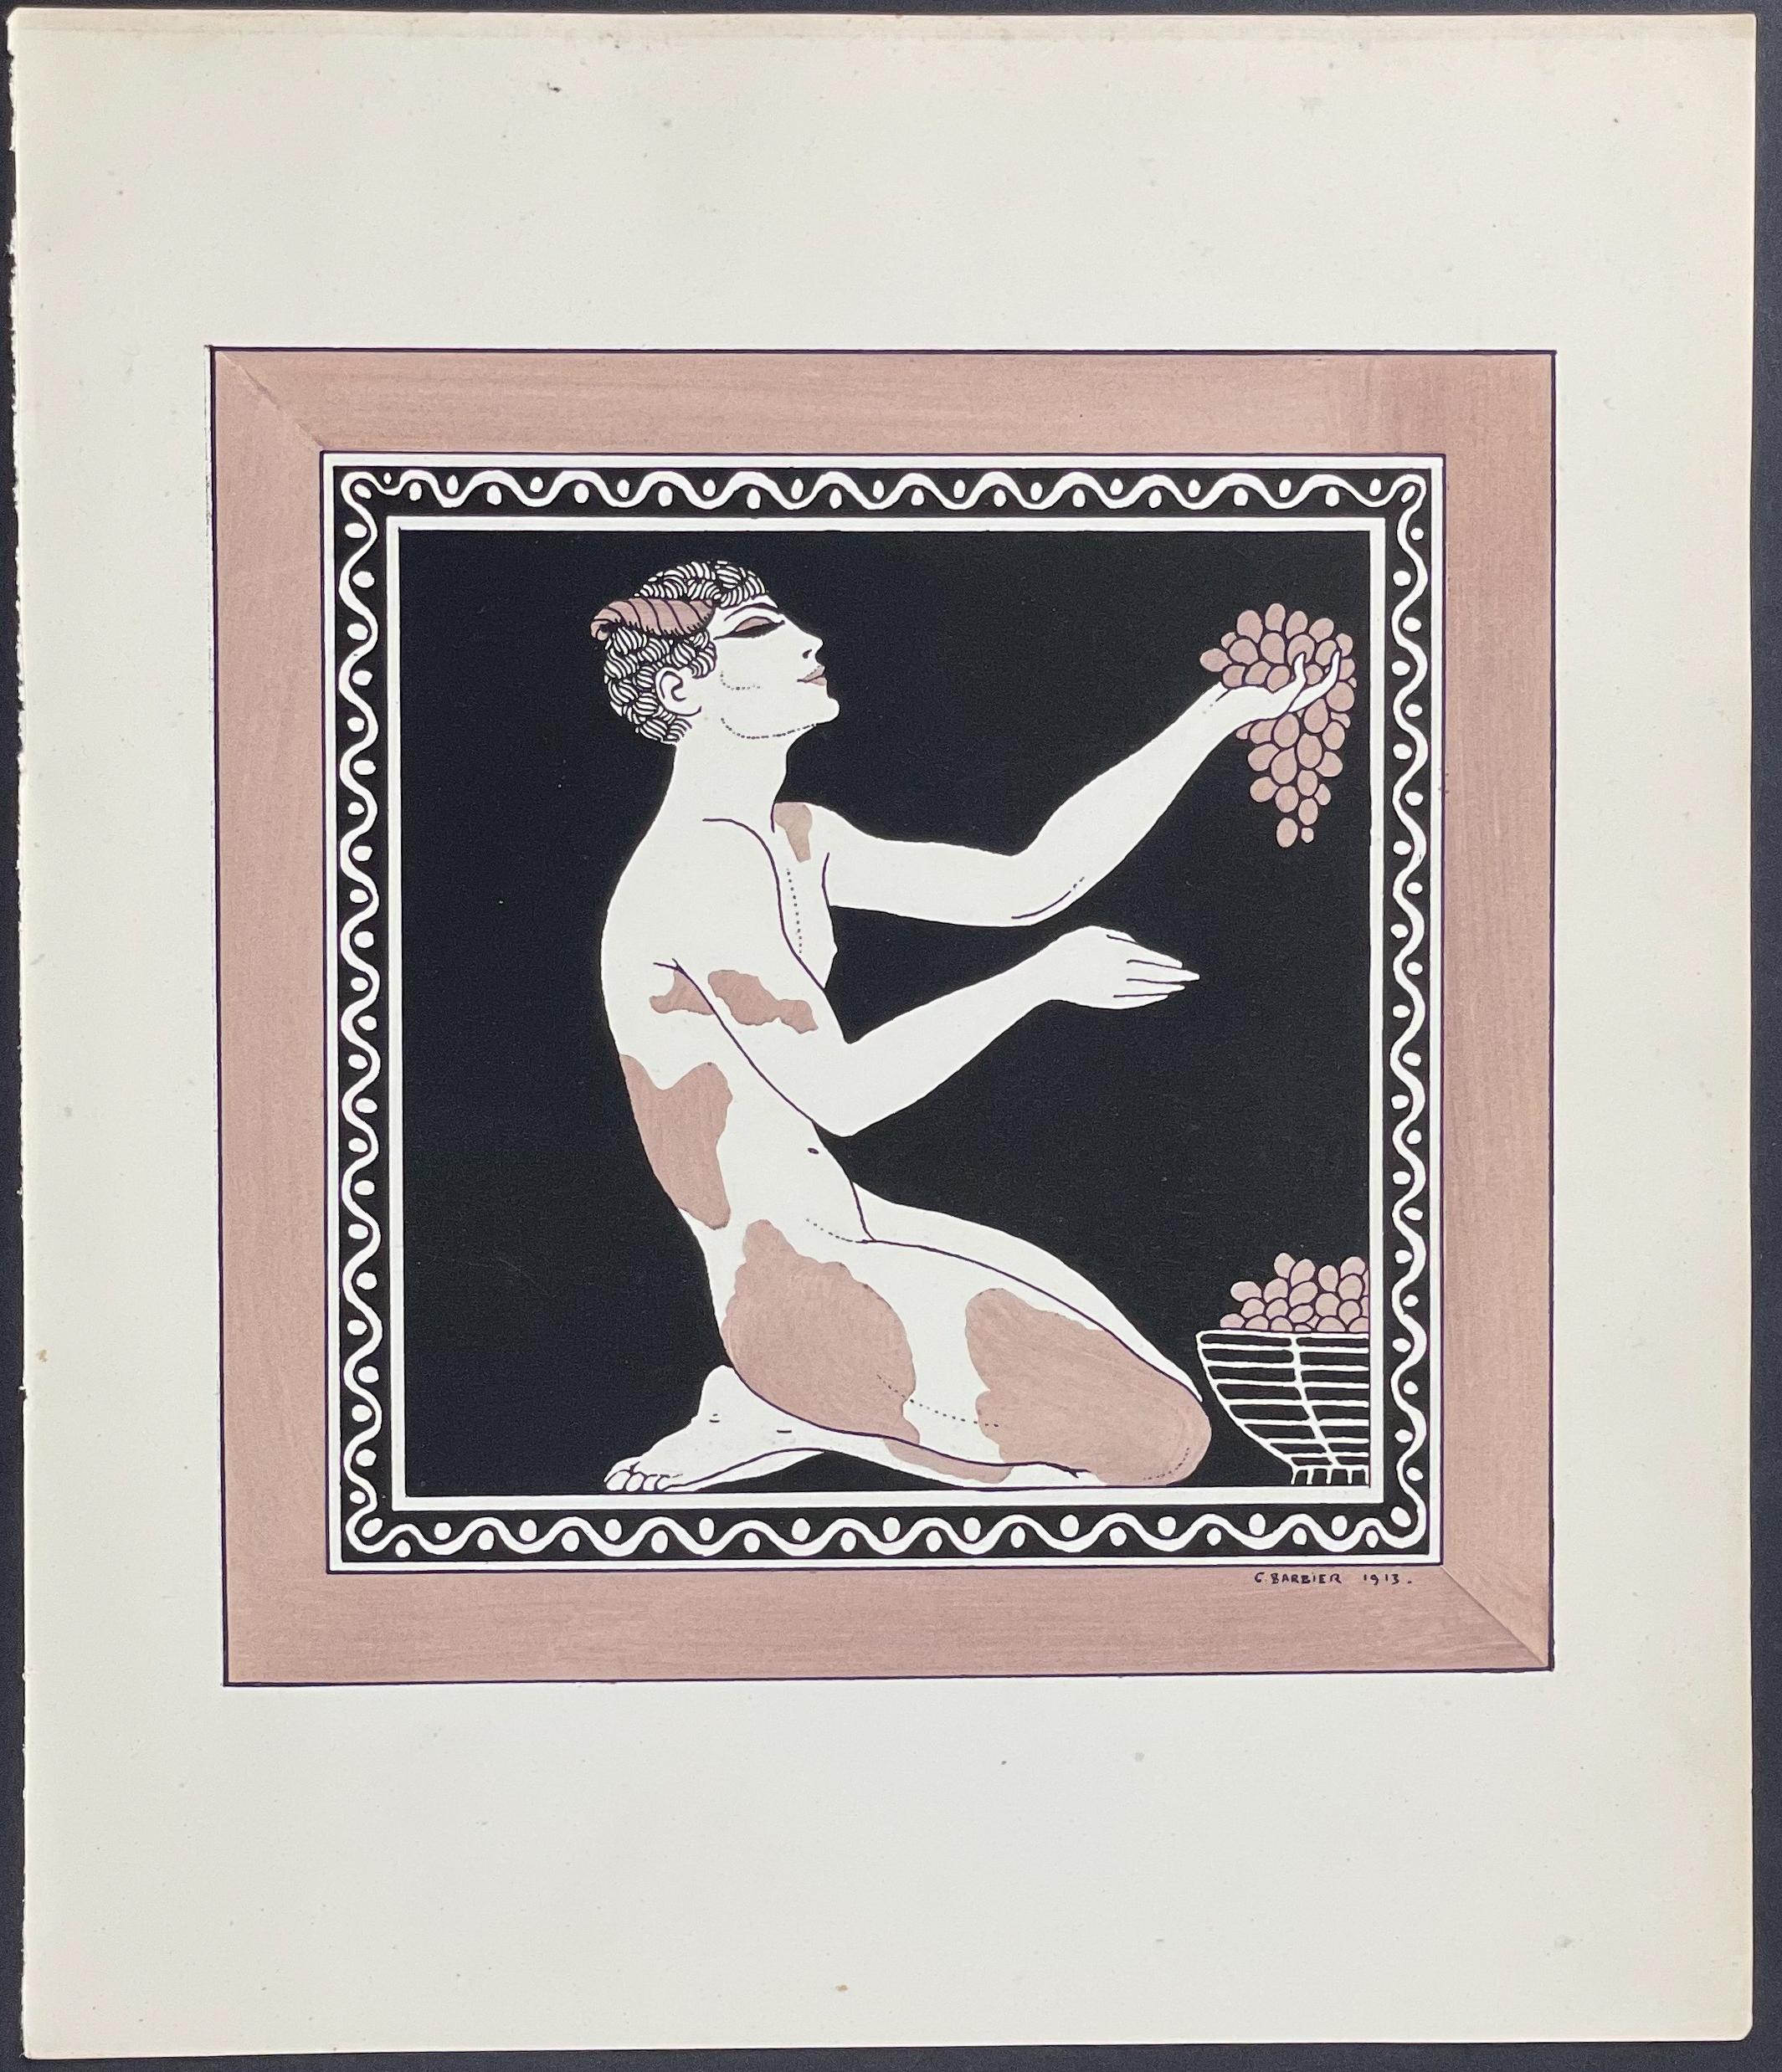 "Nude Man with Grapes" by Georges Barbier